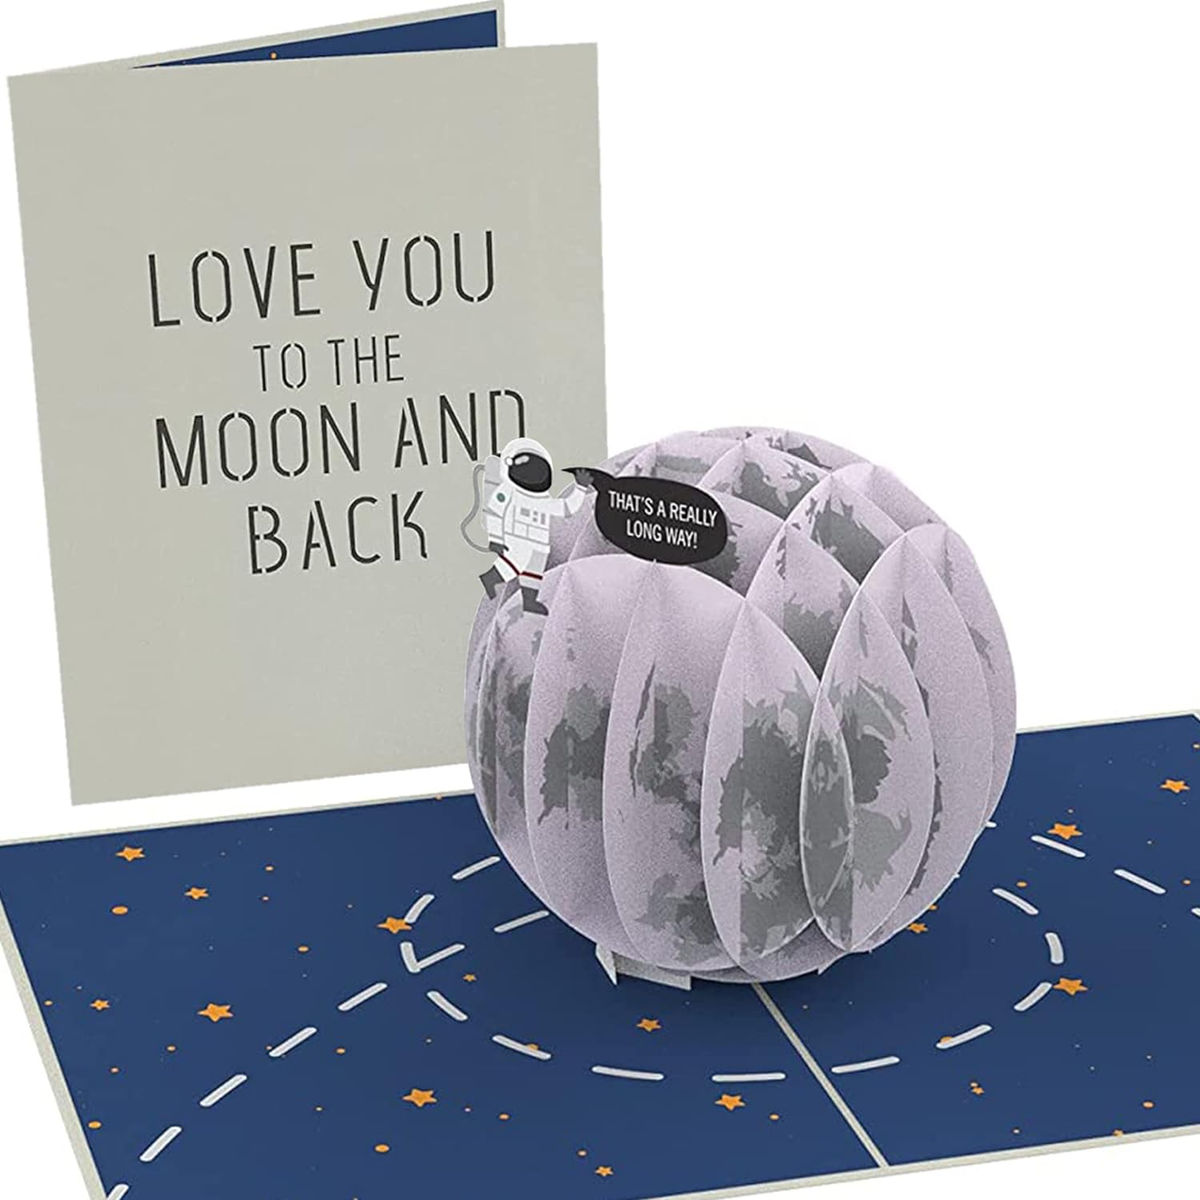 Love You to the MOON 3D Pop Up Card - Happy Birthday, Anniversary, Valentine's Day Surprise, Just Because, Father's Day